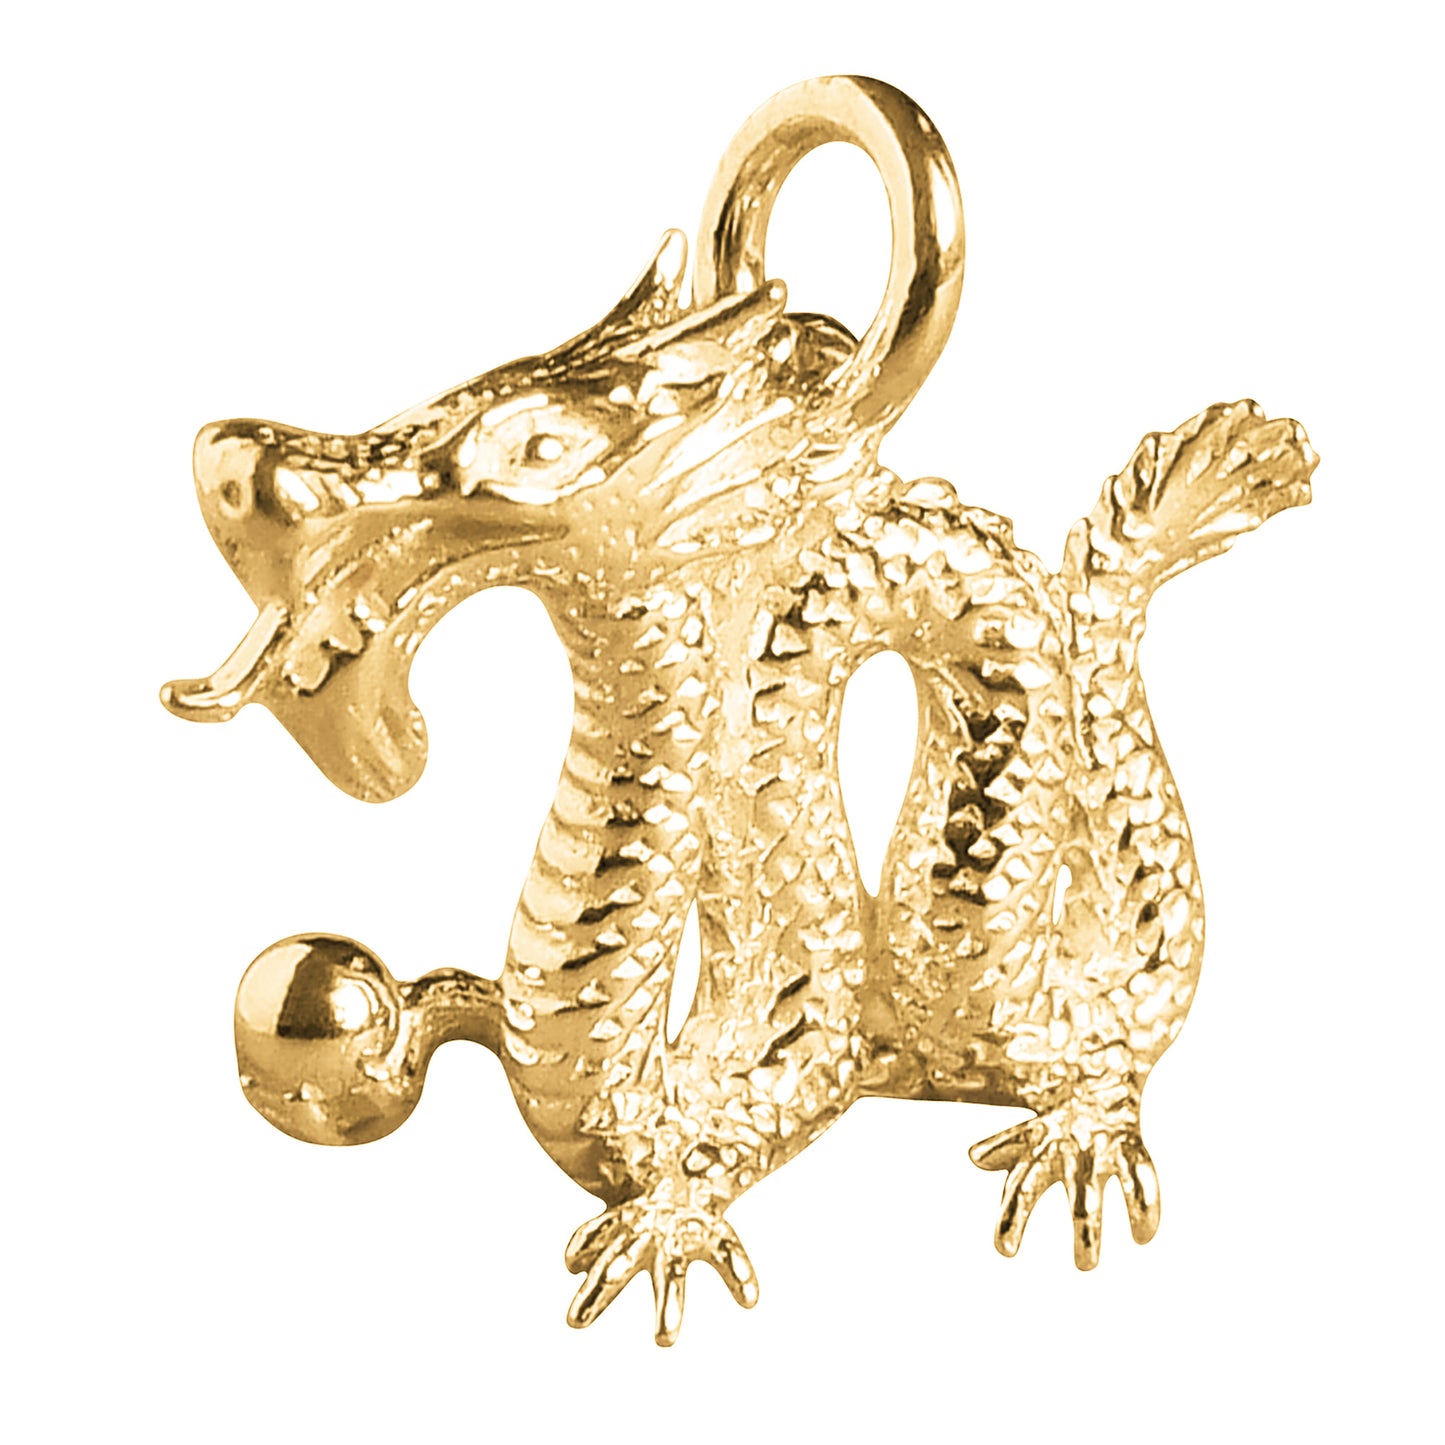 Flying Dragon Charms Shiny Gold Large Pendants 43x47mm Set of 10 A8076